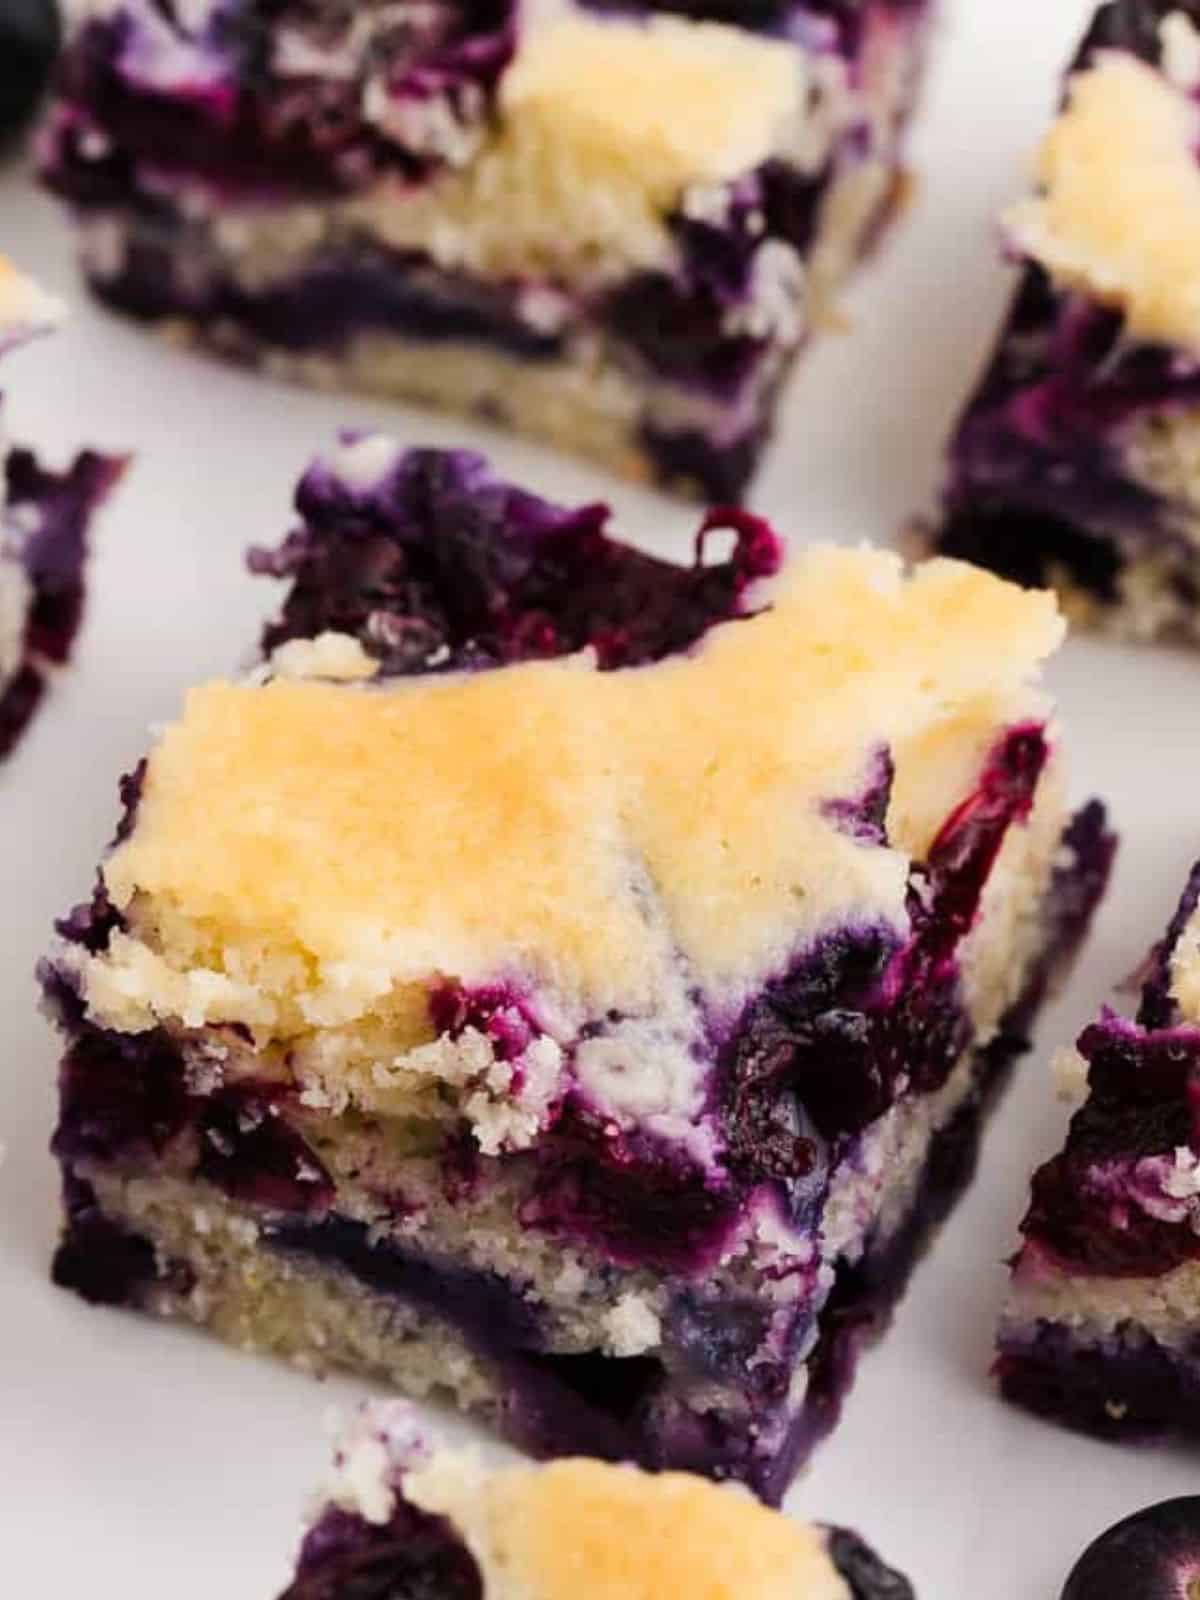 a delightful lemon blueberry buttermilk cake, a perfect balance of tangy and sweet flavors.